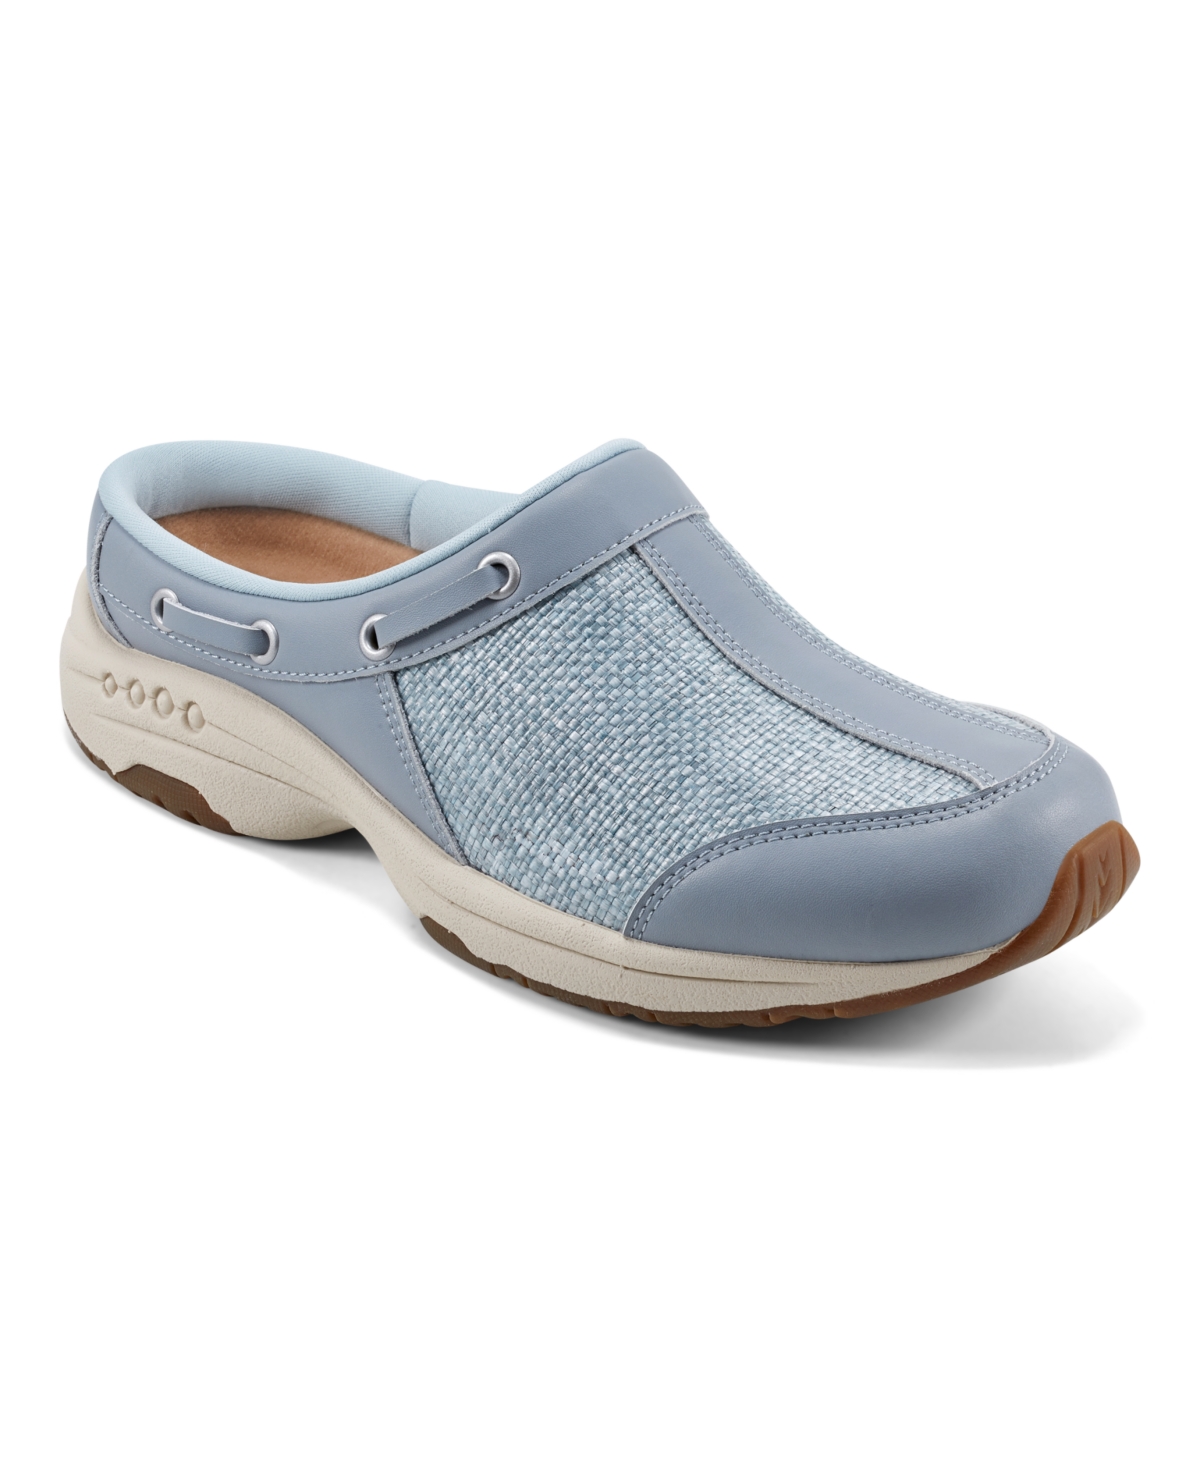 Women's Travelport Round Toe Casual Slip-on Mules - Light Blue Woven Multi - Leather, Manmad